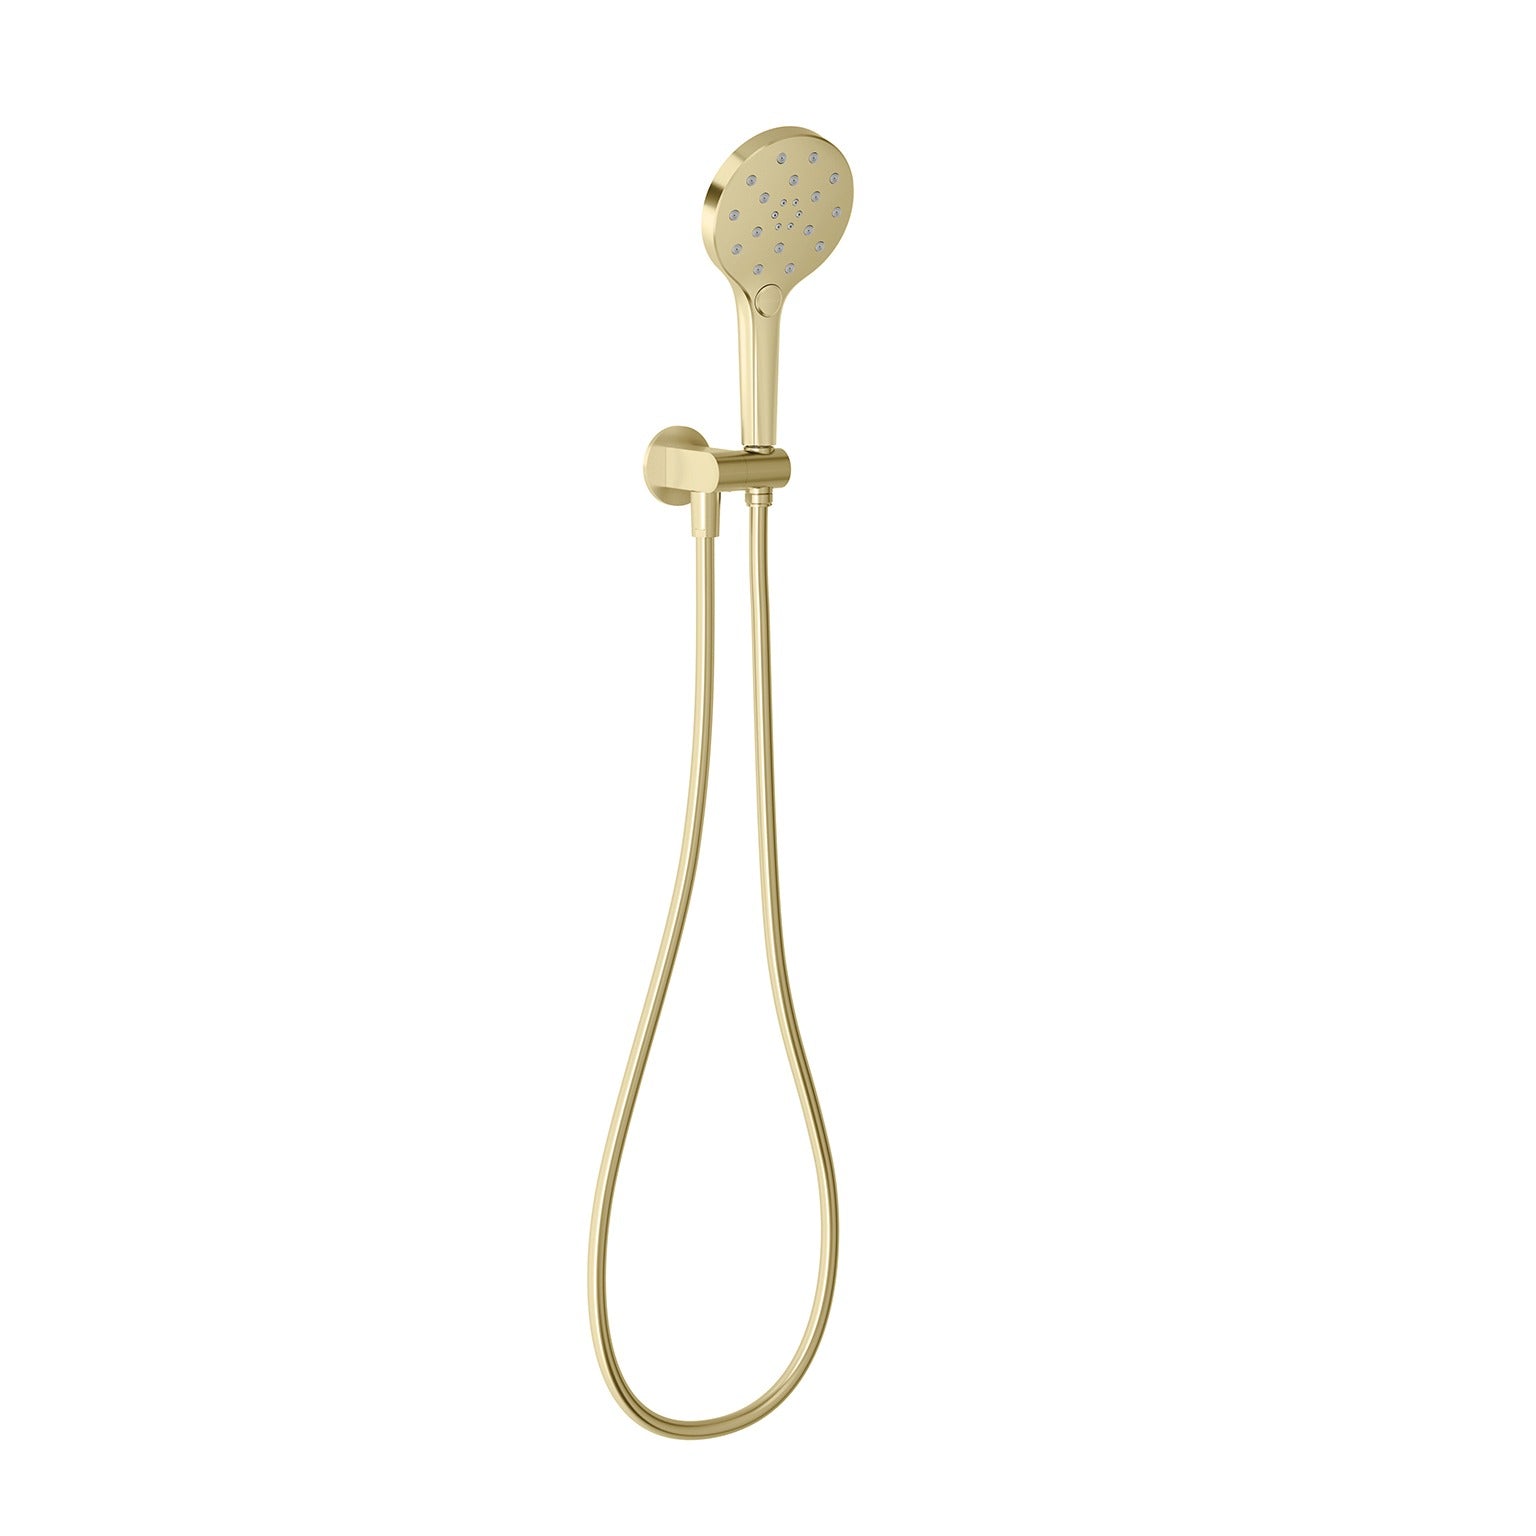 PHOENIX OXLEY HAND SHOWER BRUSHED GOLD